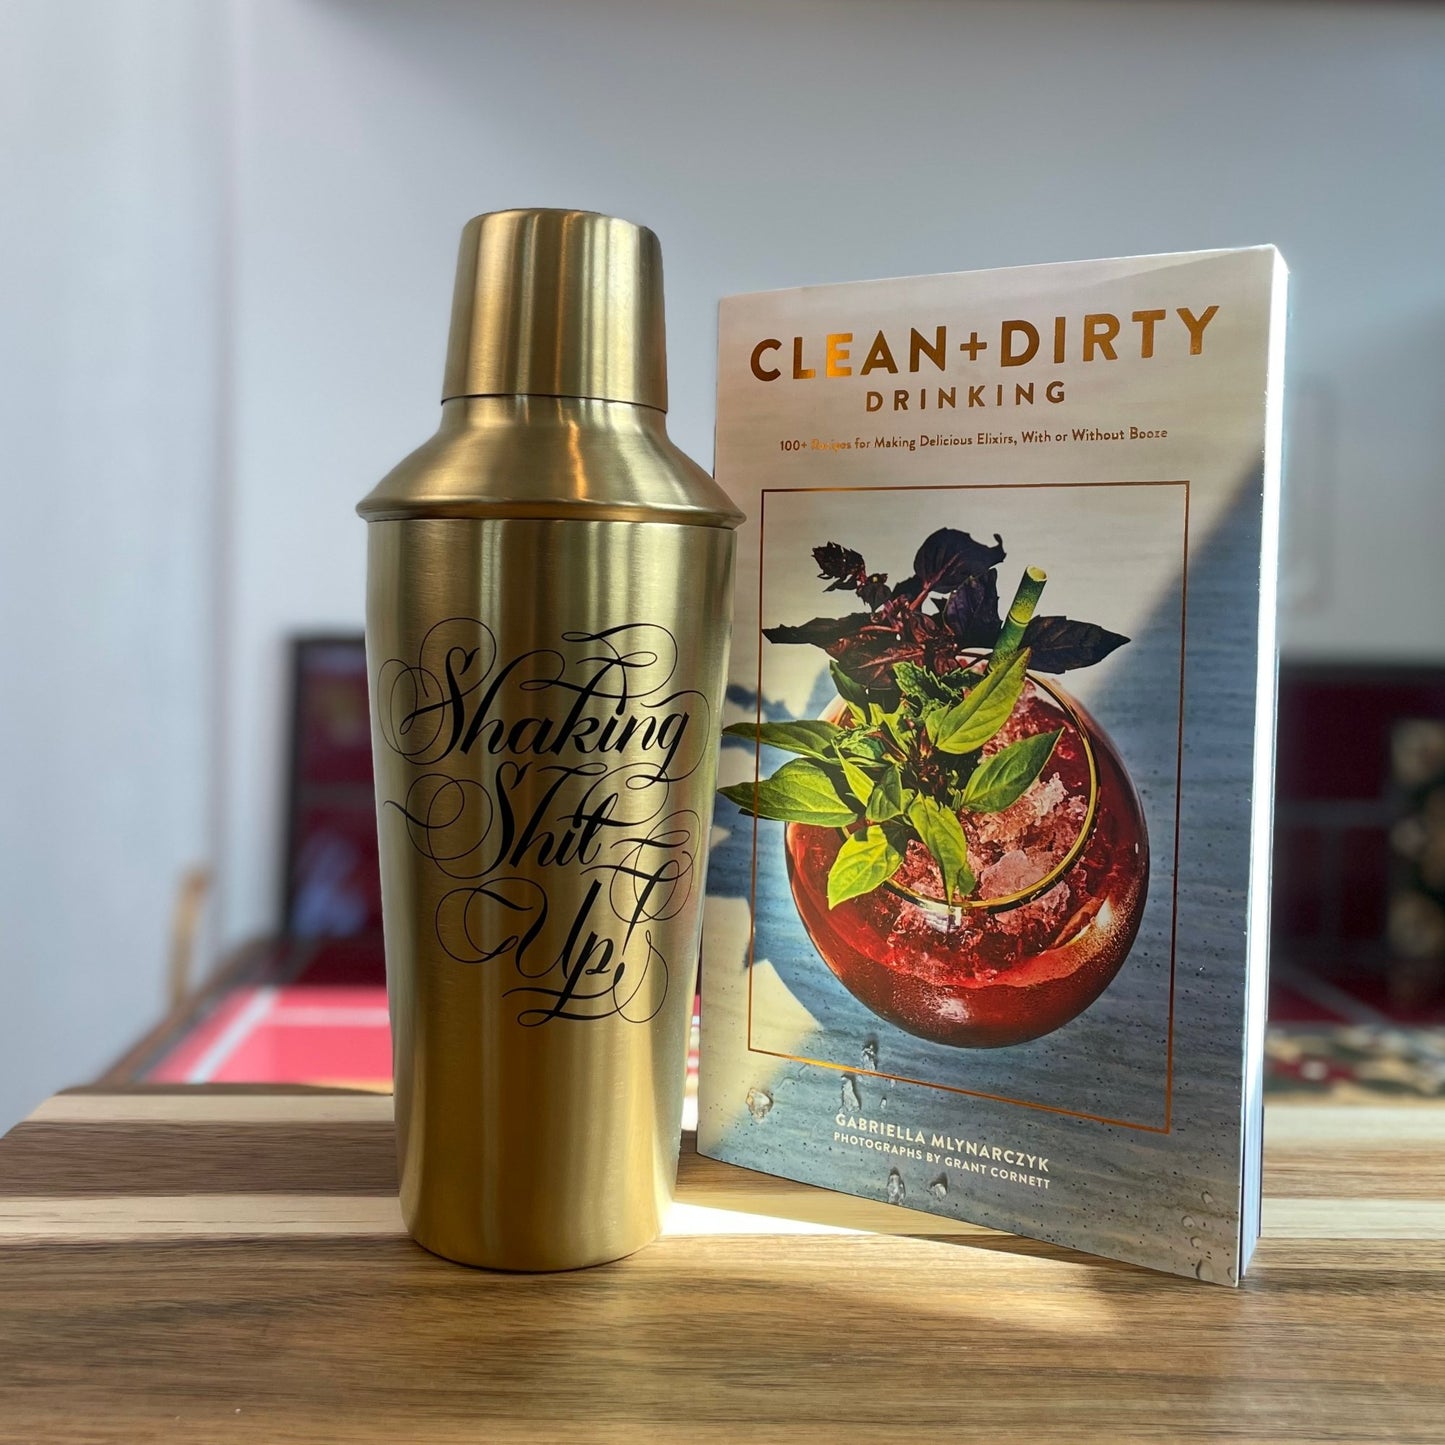 The Clean + Dirty Drinking recipe book next to the gold cocktail shaker on a kitchen counter